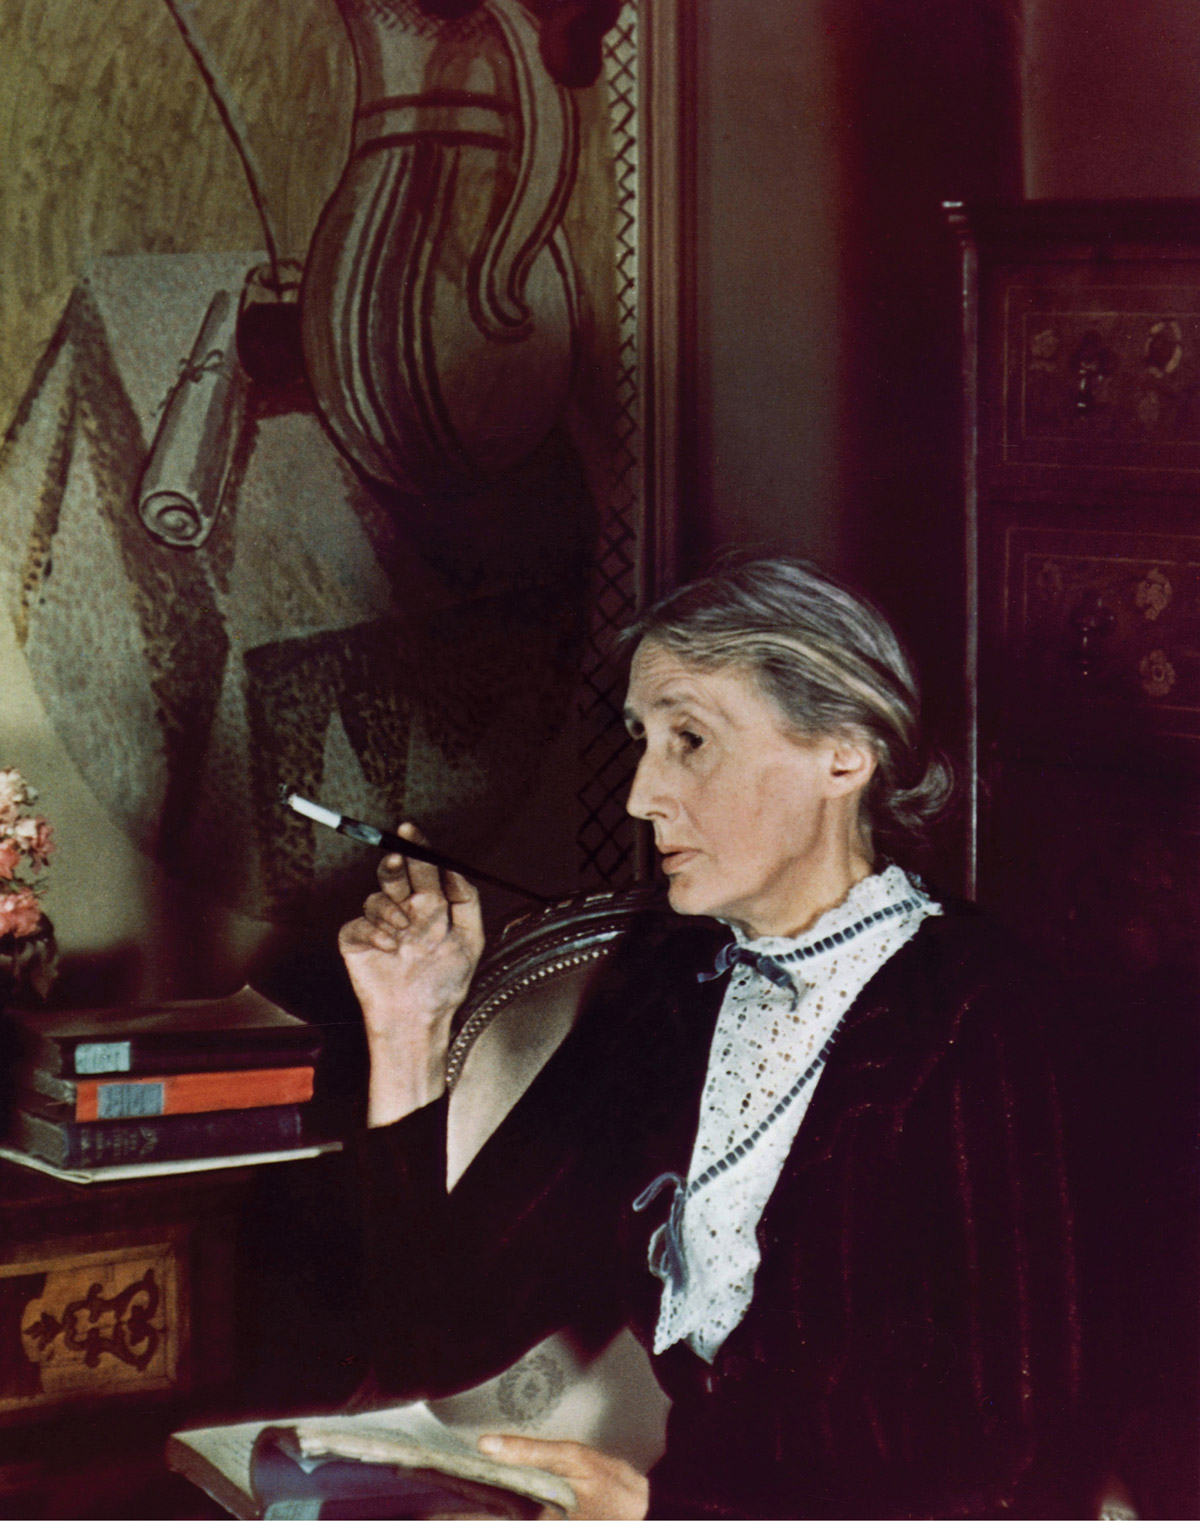 A nineteen thirty nine photograph of Virginia Woolf smoking while reading.